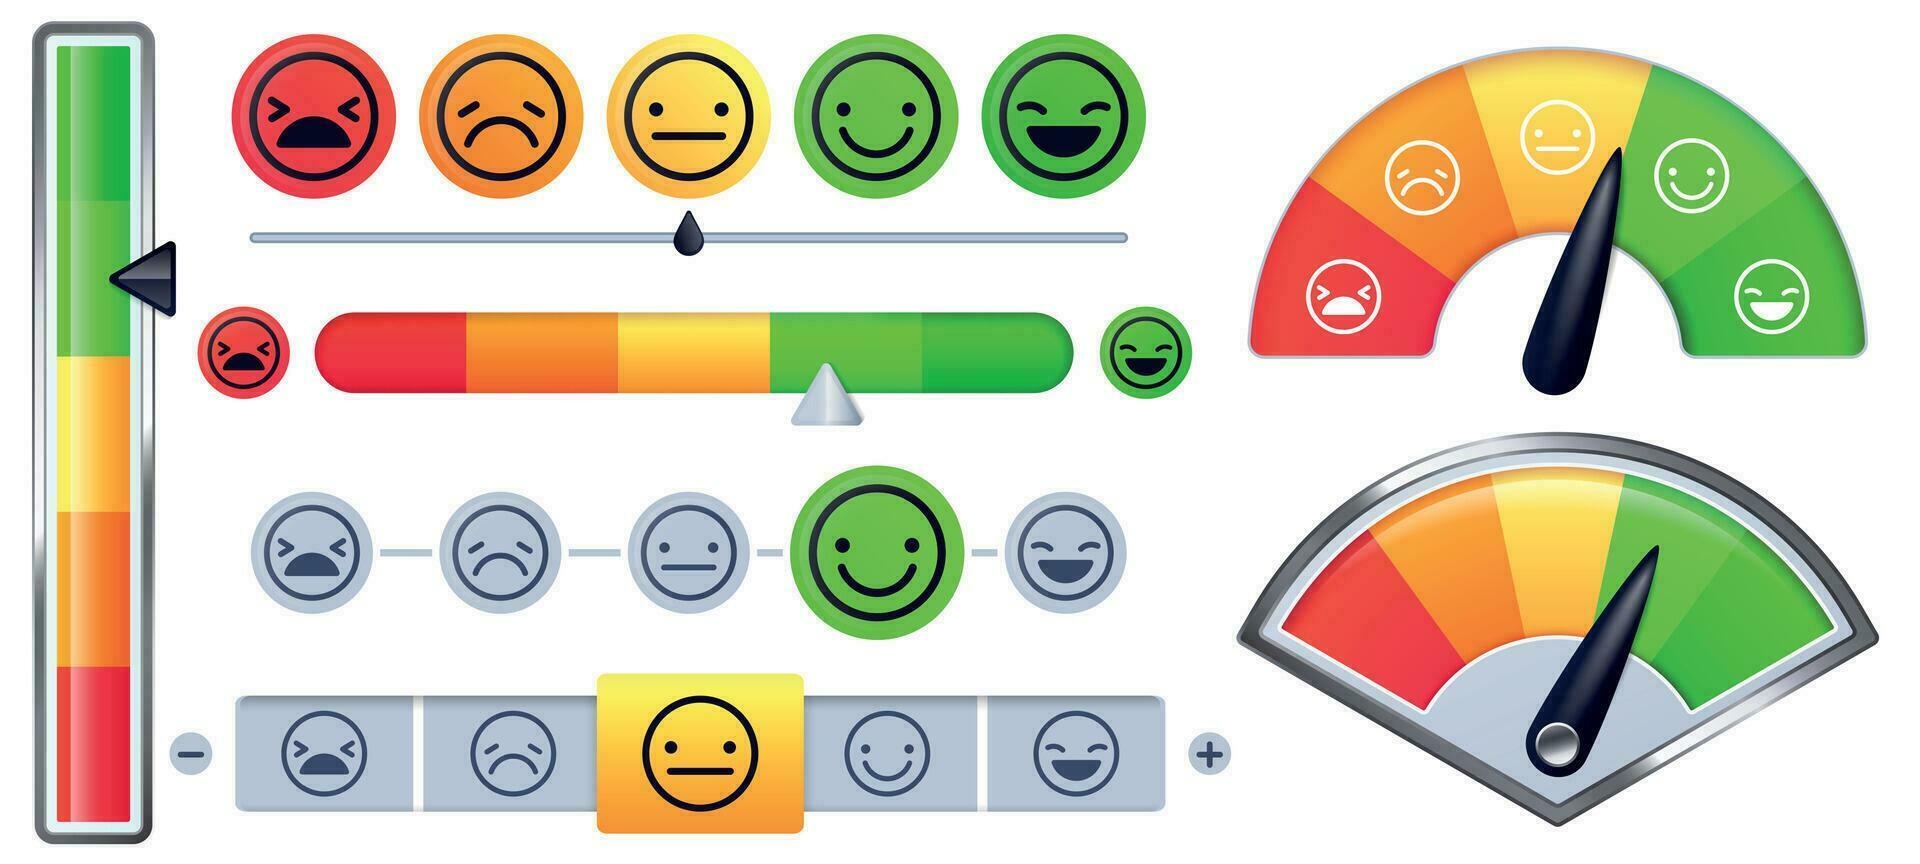 Customer satisfaction meter scale. Customer rate with green happy smile and sad red faces, emotion measurements scales vector set